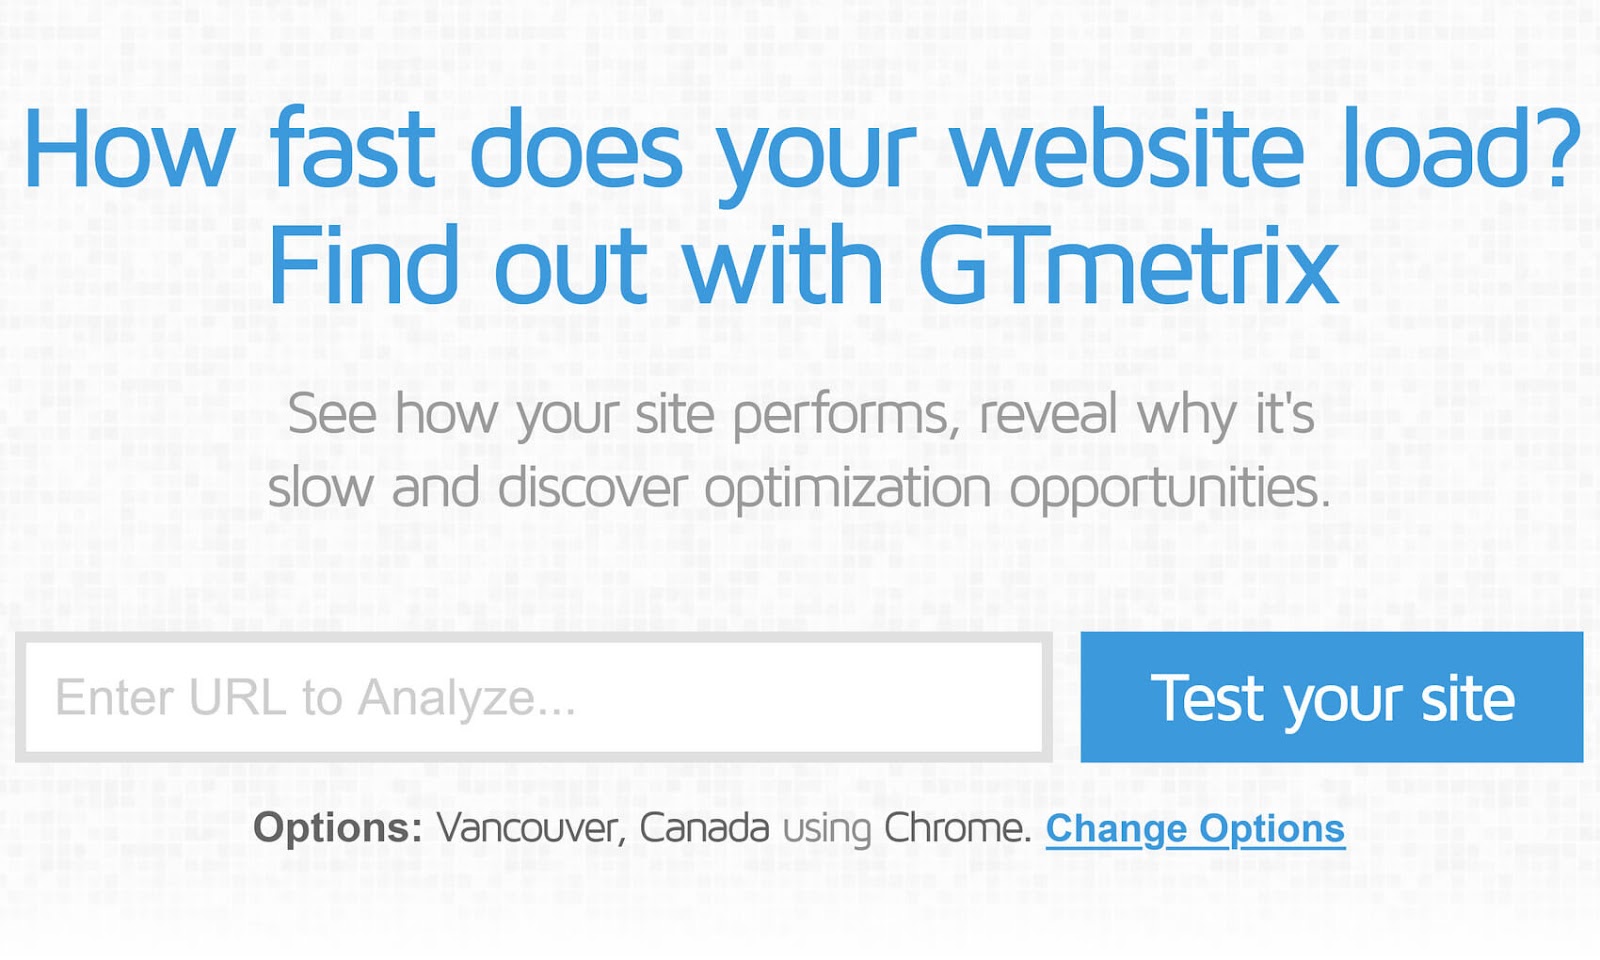 GTmetrix website velocity  trial  instrumentality   with a hunt  container  to participate  a URL and a bluish  "Test your site" button.